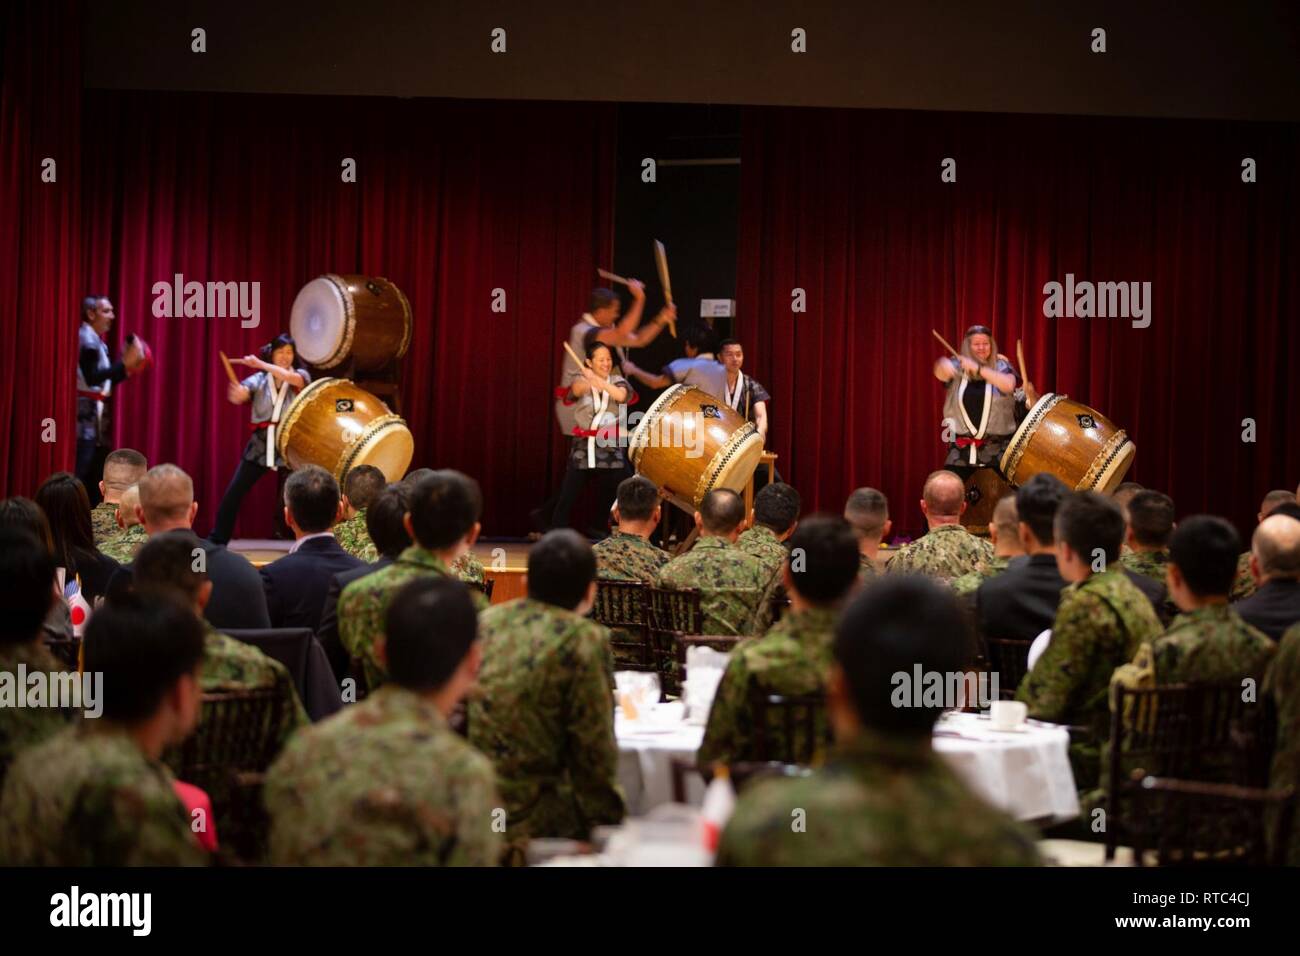 U.S. Marines and Japan Ground Self-Defense Force Soldiers watch a drum performance during the closing ceremony for exercise Iron Fist 2019, Feb. 8, on U.S. Marine Corps Base Camp Pendleton, Calif. Exercise Iron Fist is an annual, multilateral training exercise where U.S. and Japanese service members train together and share techniques, tactics and procedures to improve their combined operational capabilities. Stock Photo